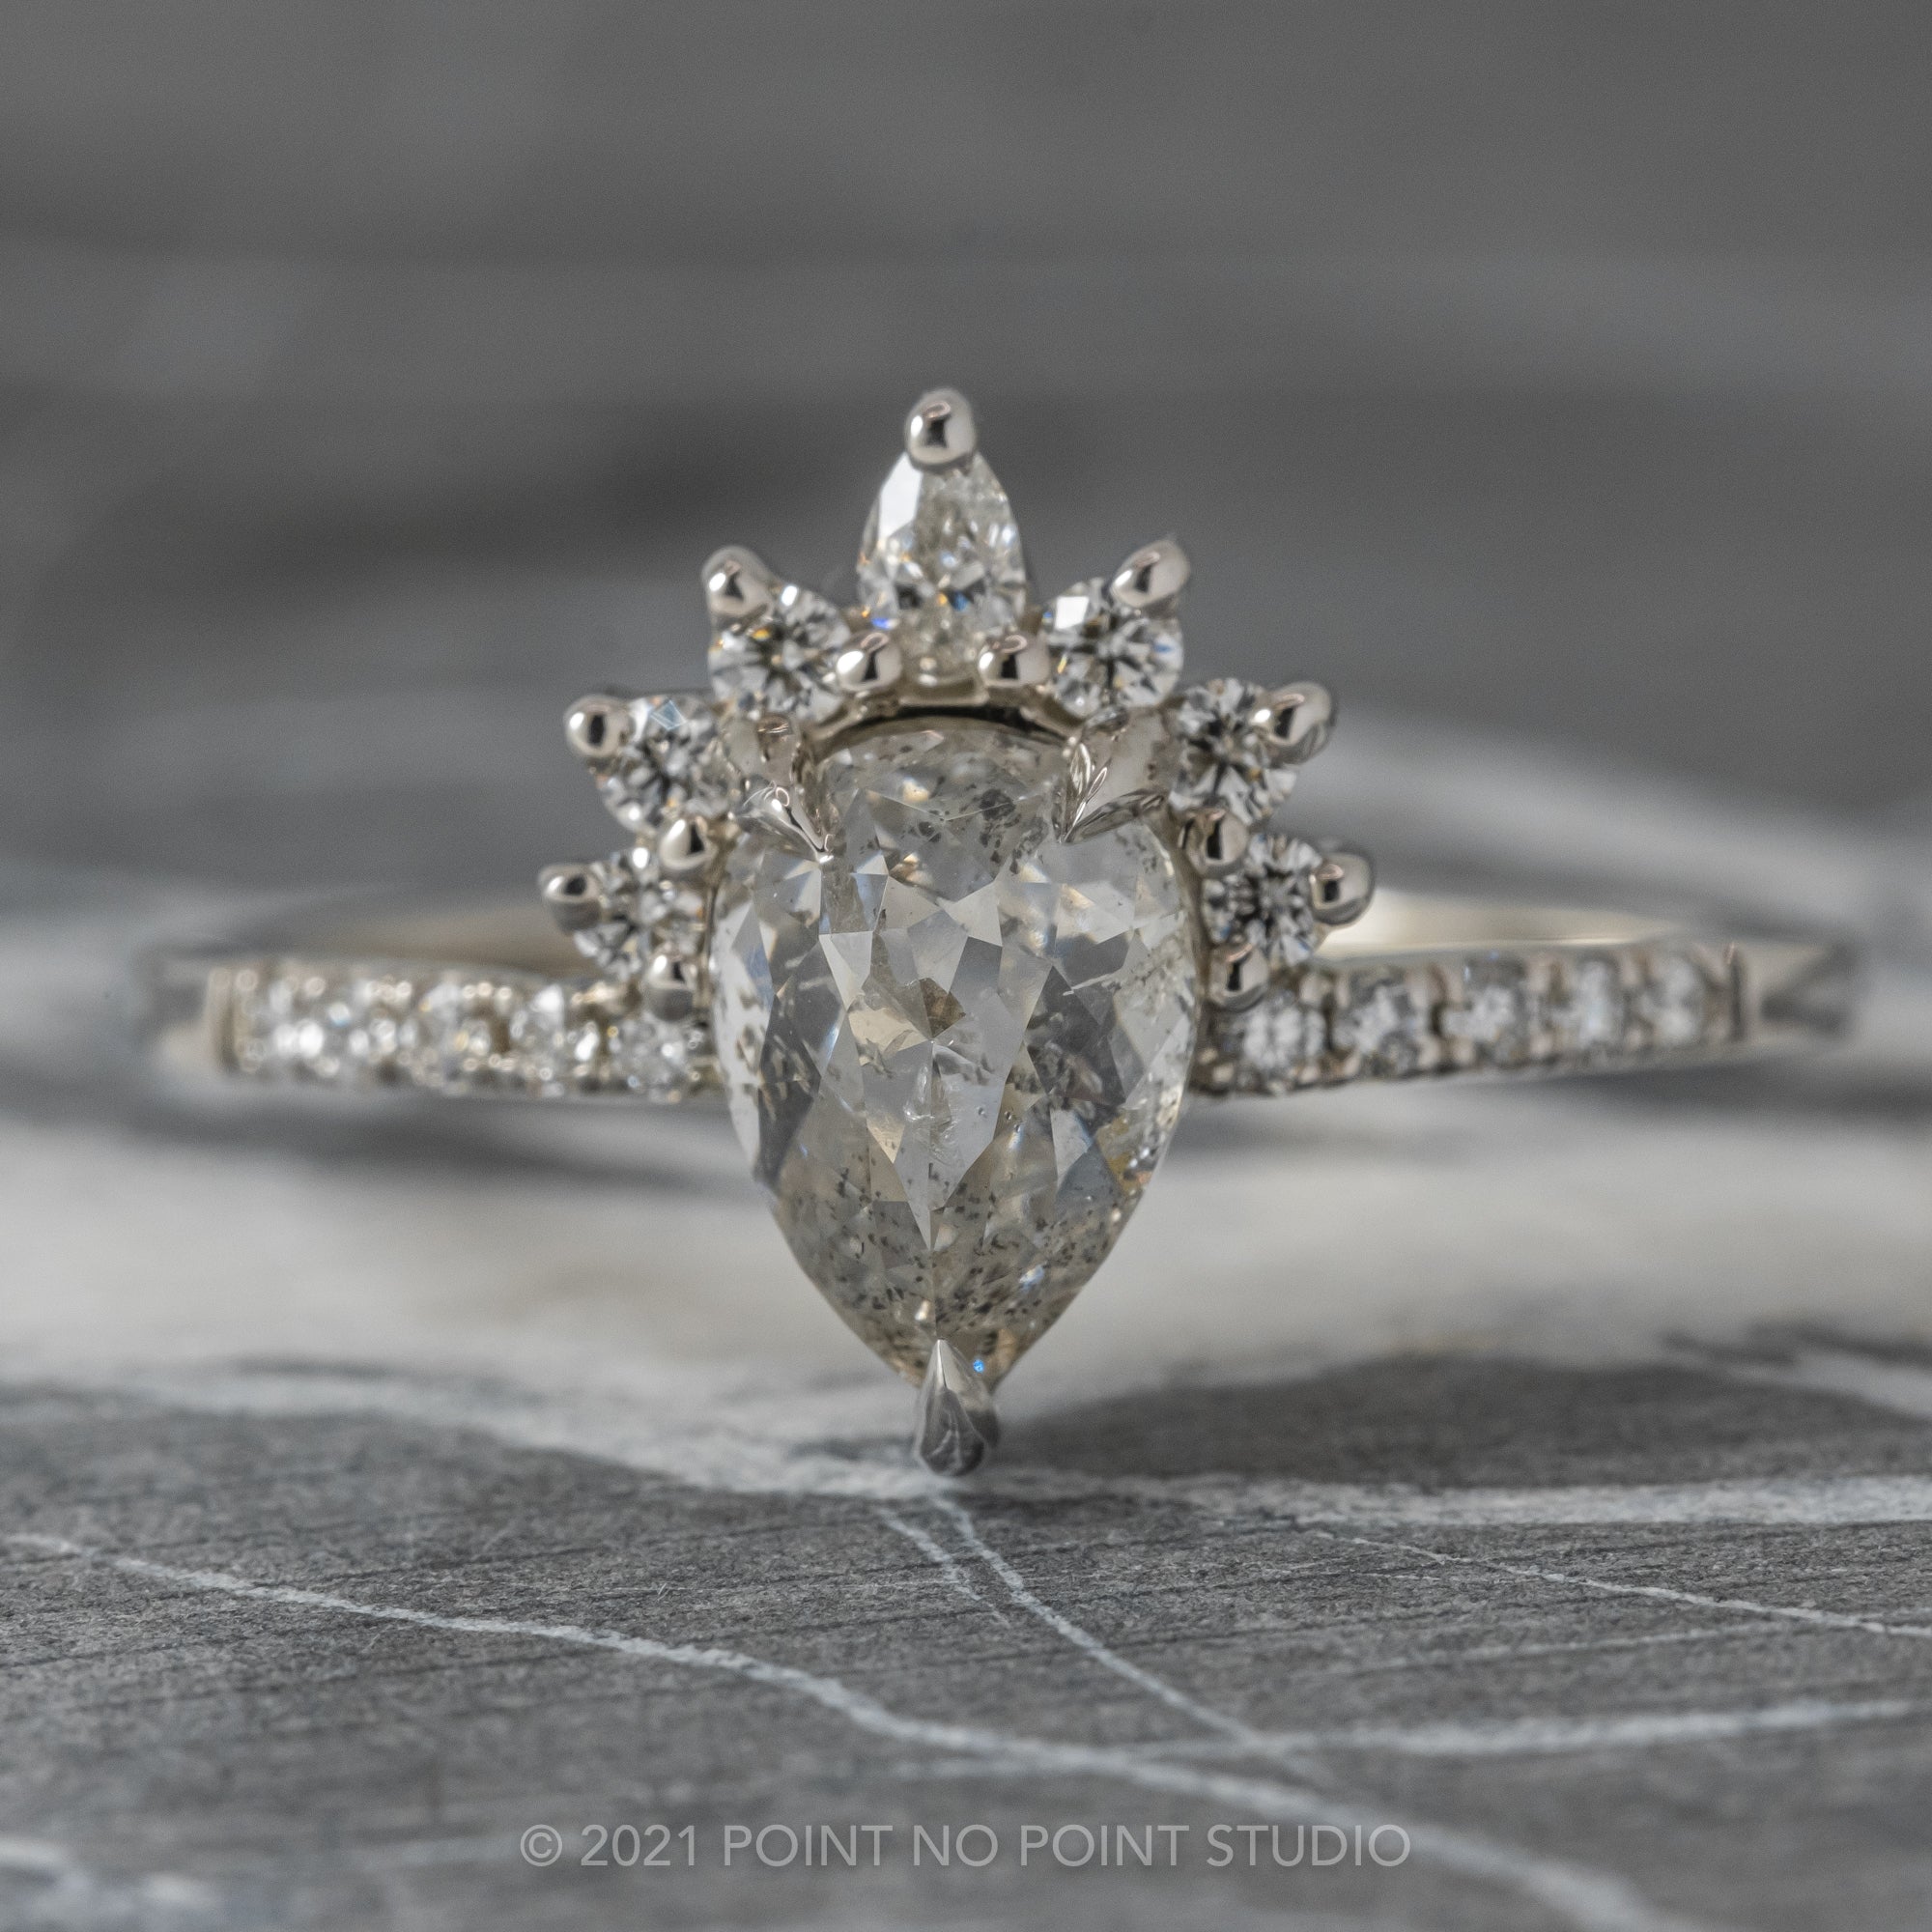 Icy White Diamond Engagement Ring, Point No Point Studio